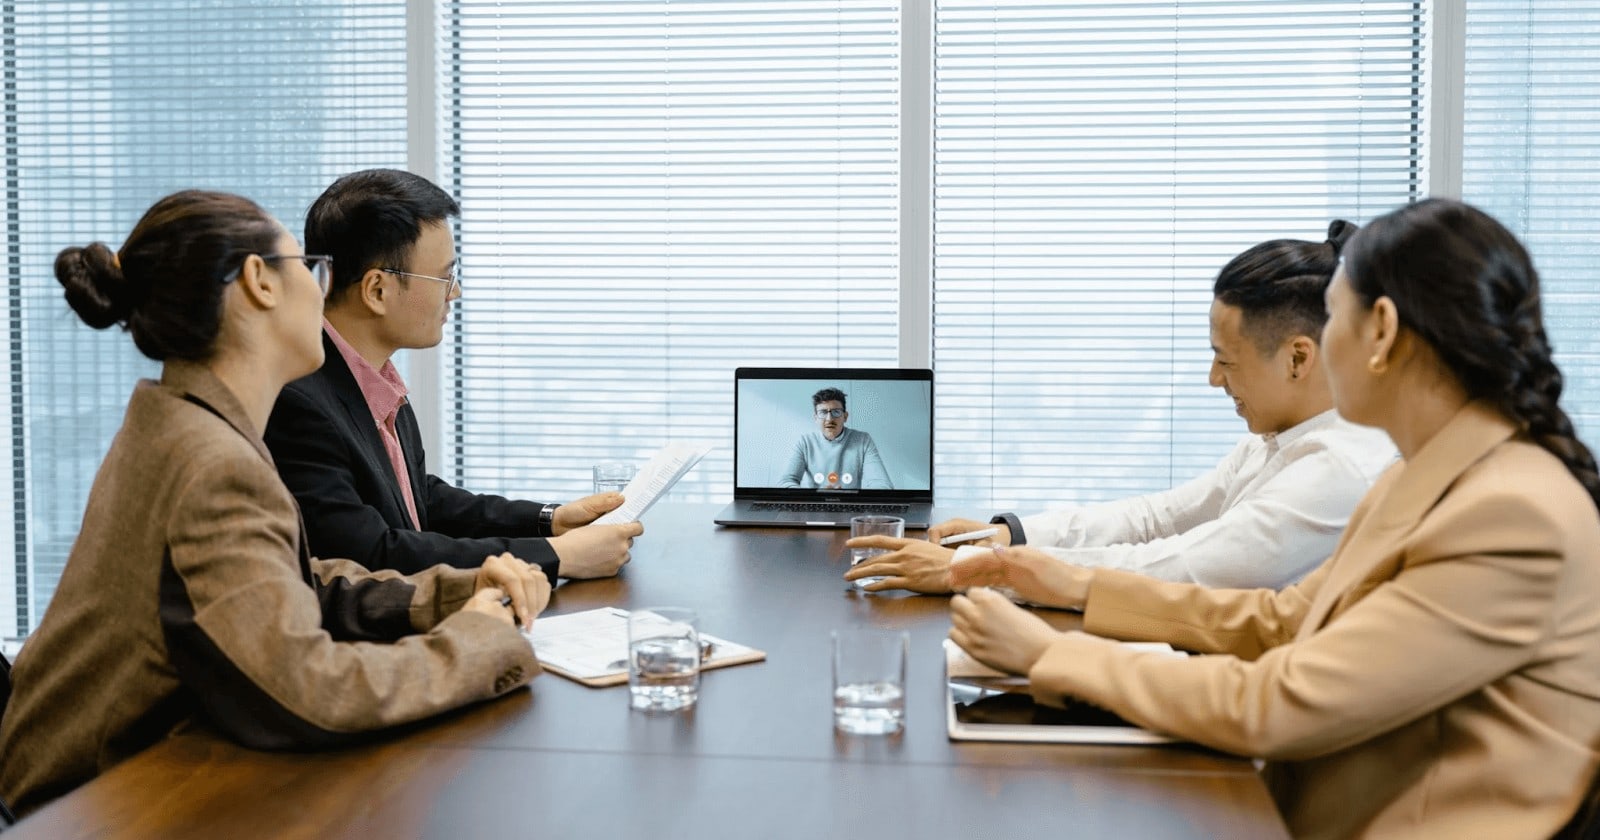 Outsourced employees have a virtual meeting with team members